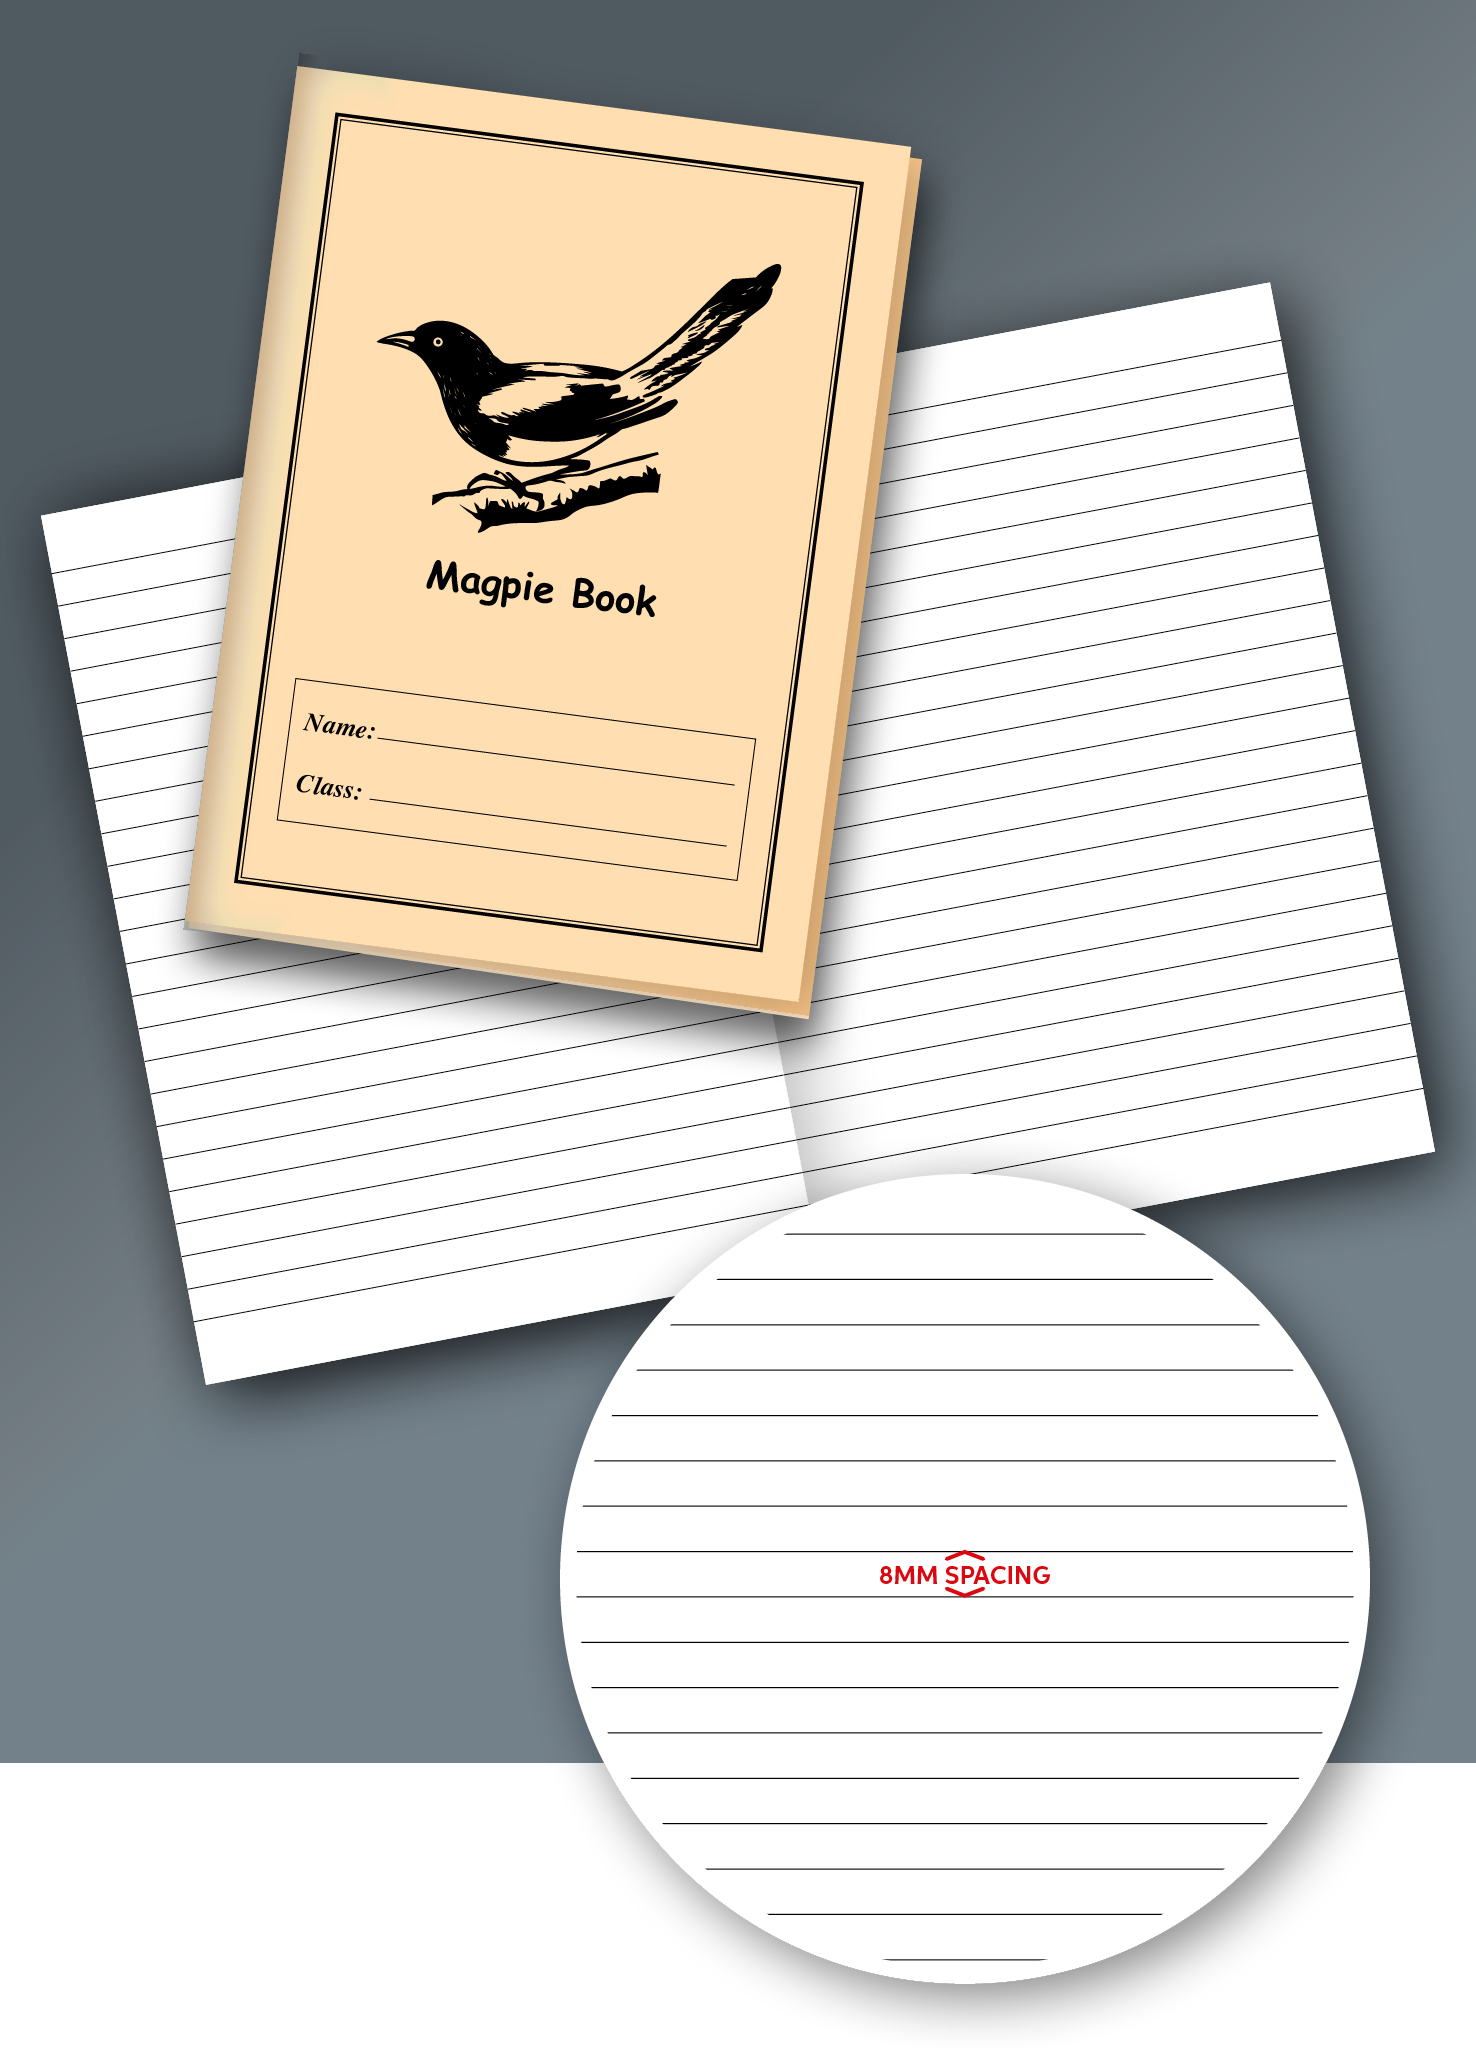 Magpie book. 64pp A5 text.